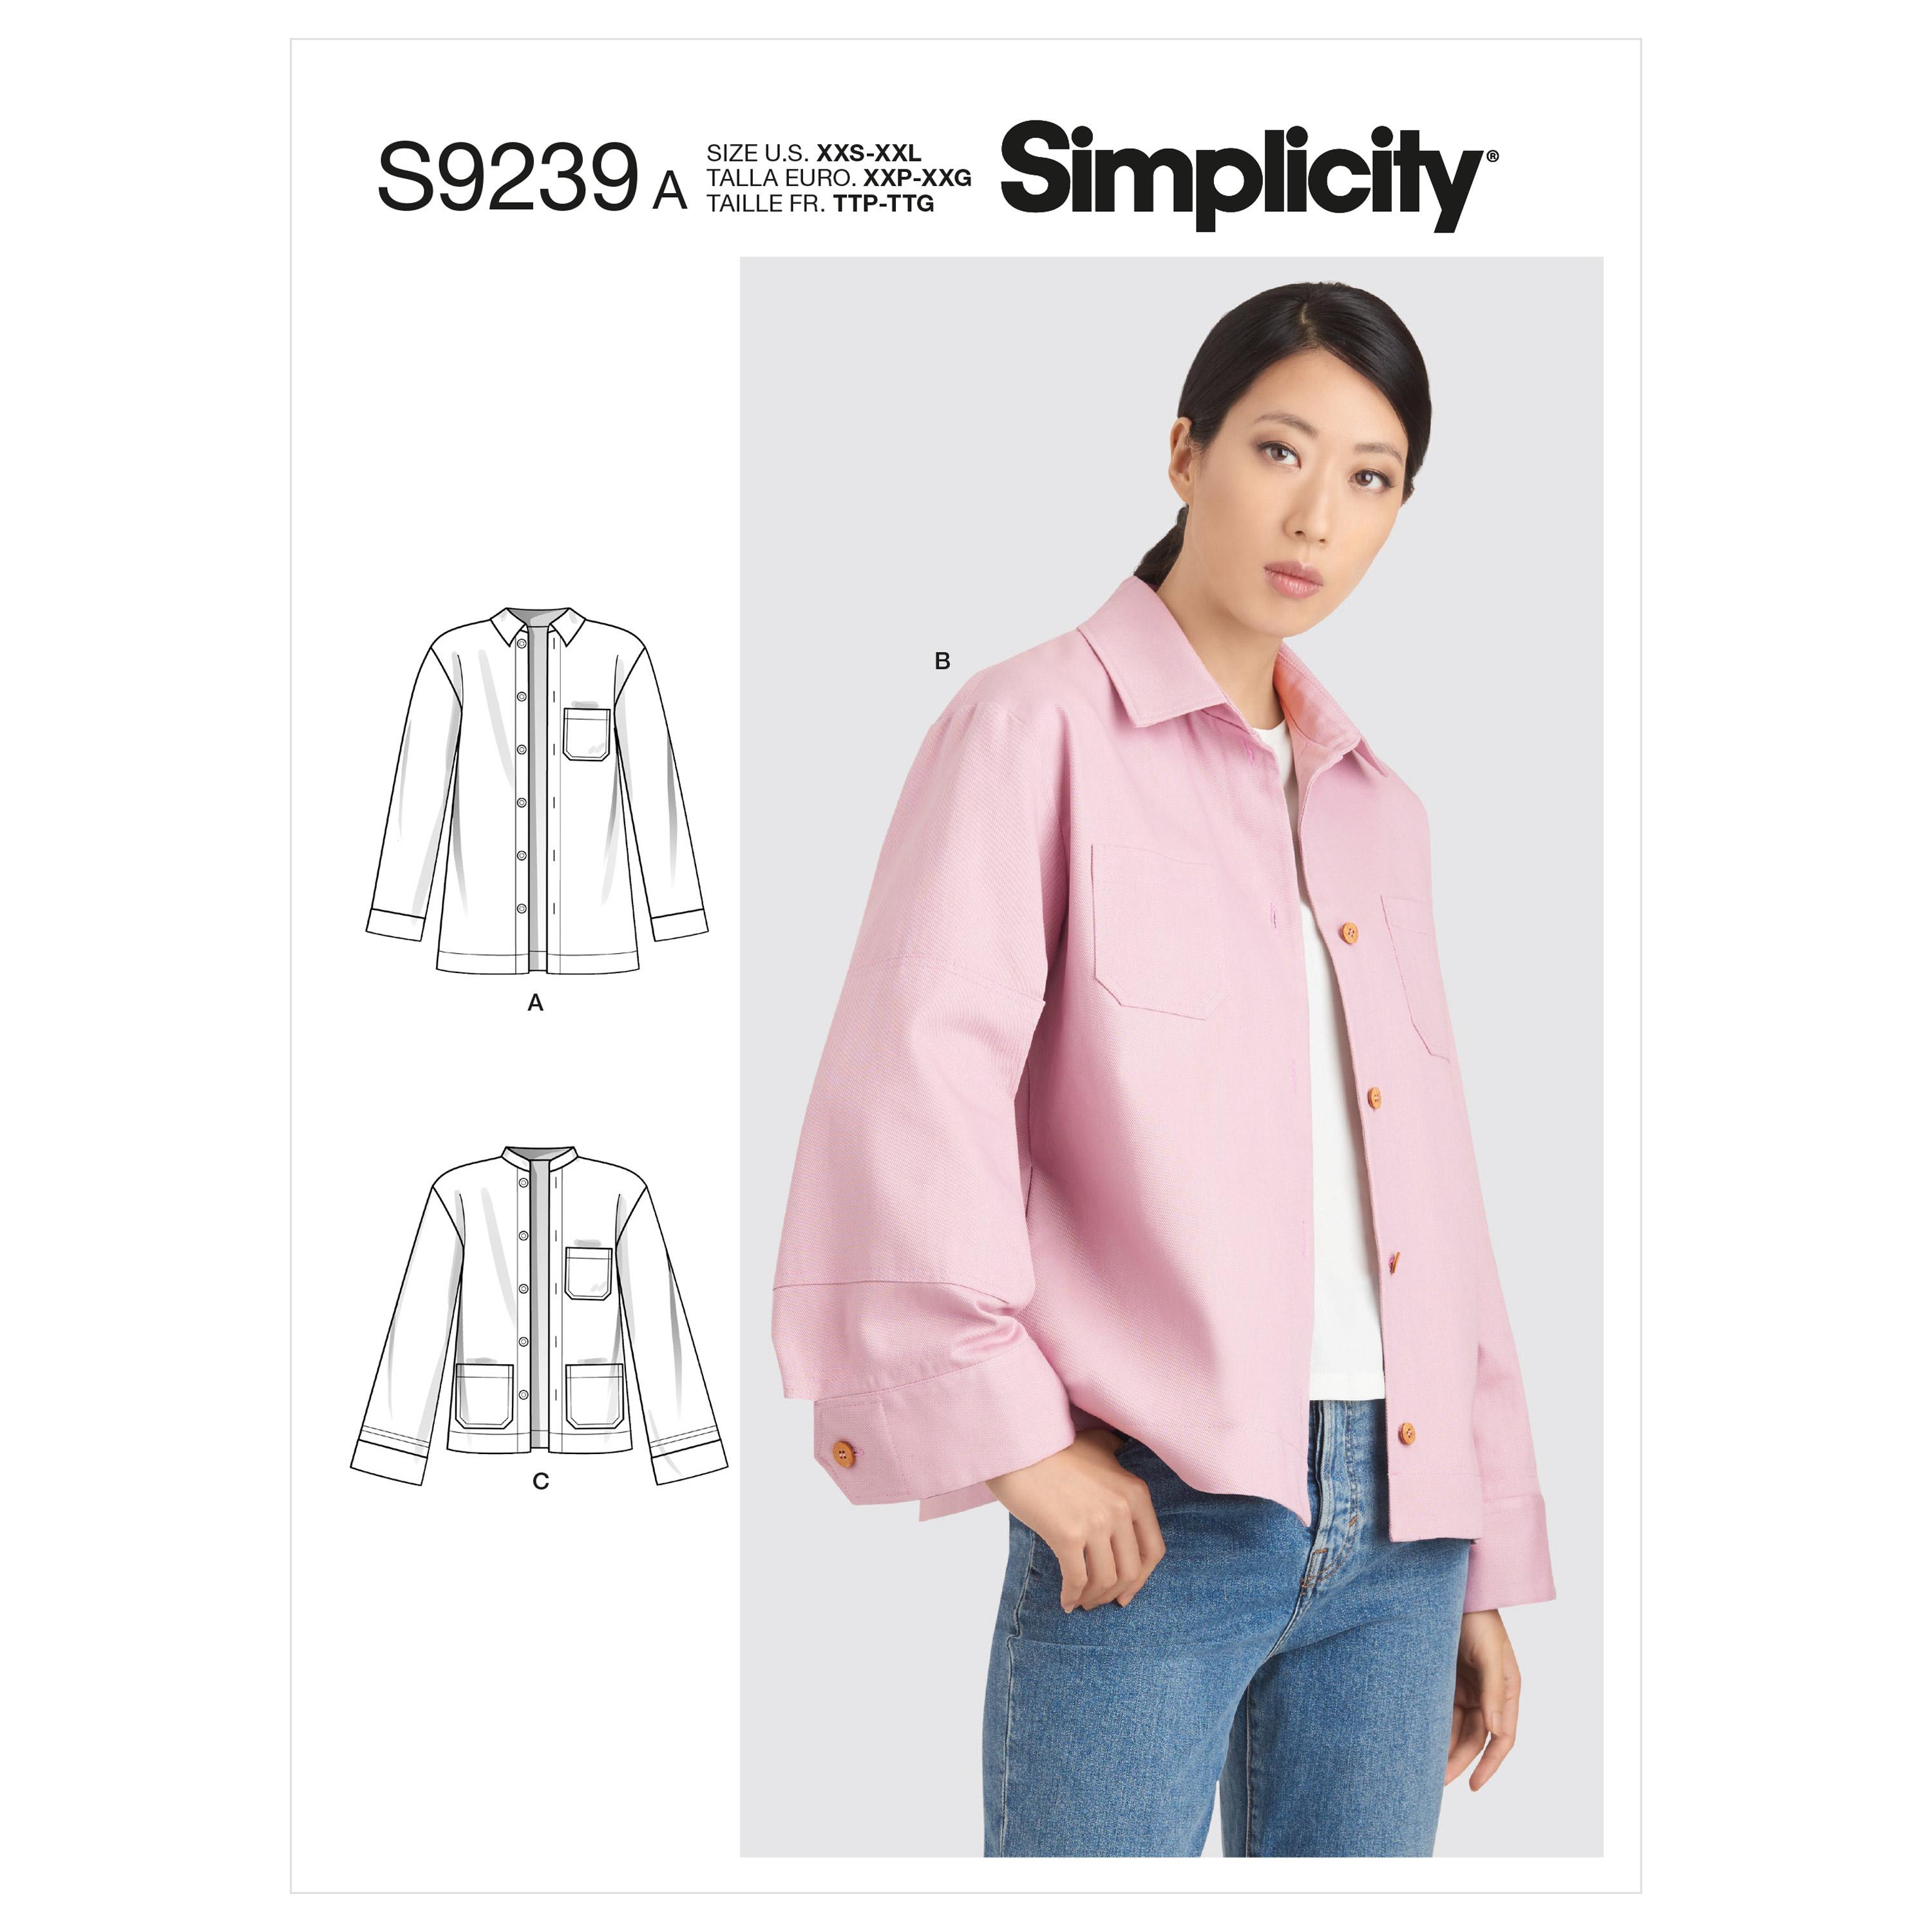 Simplicity Sewing Pattern S9239 Misses' Jackets